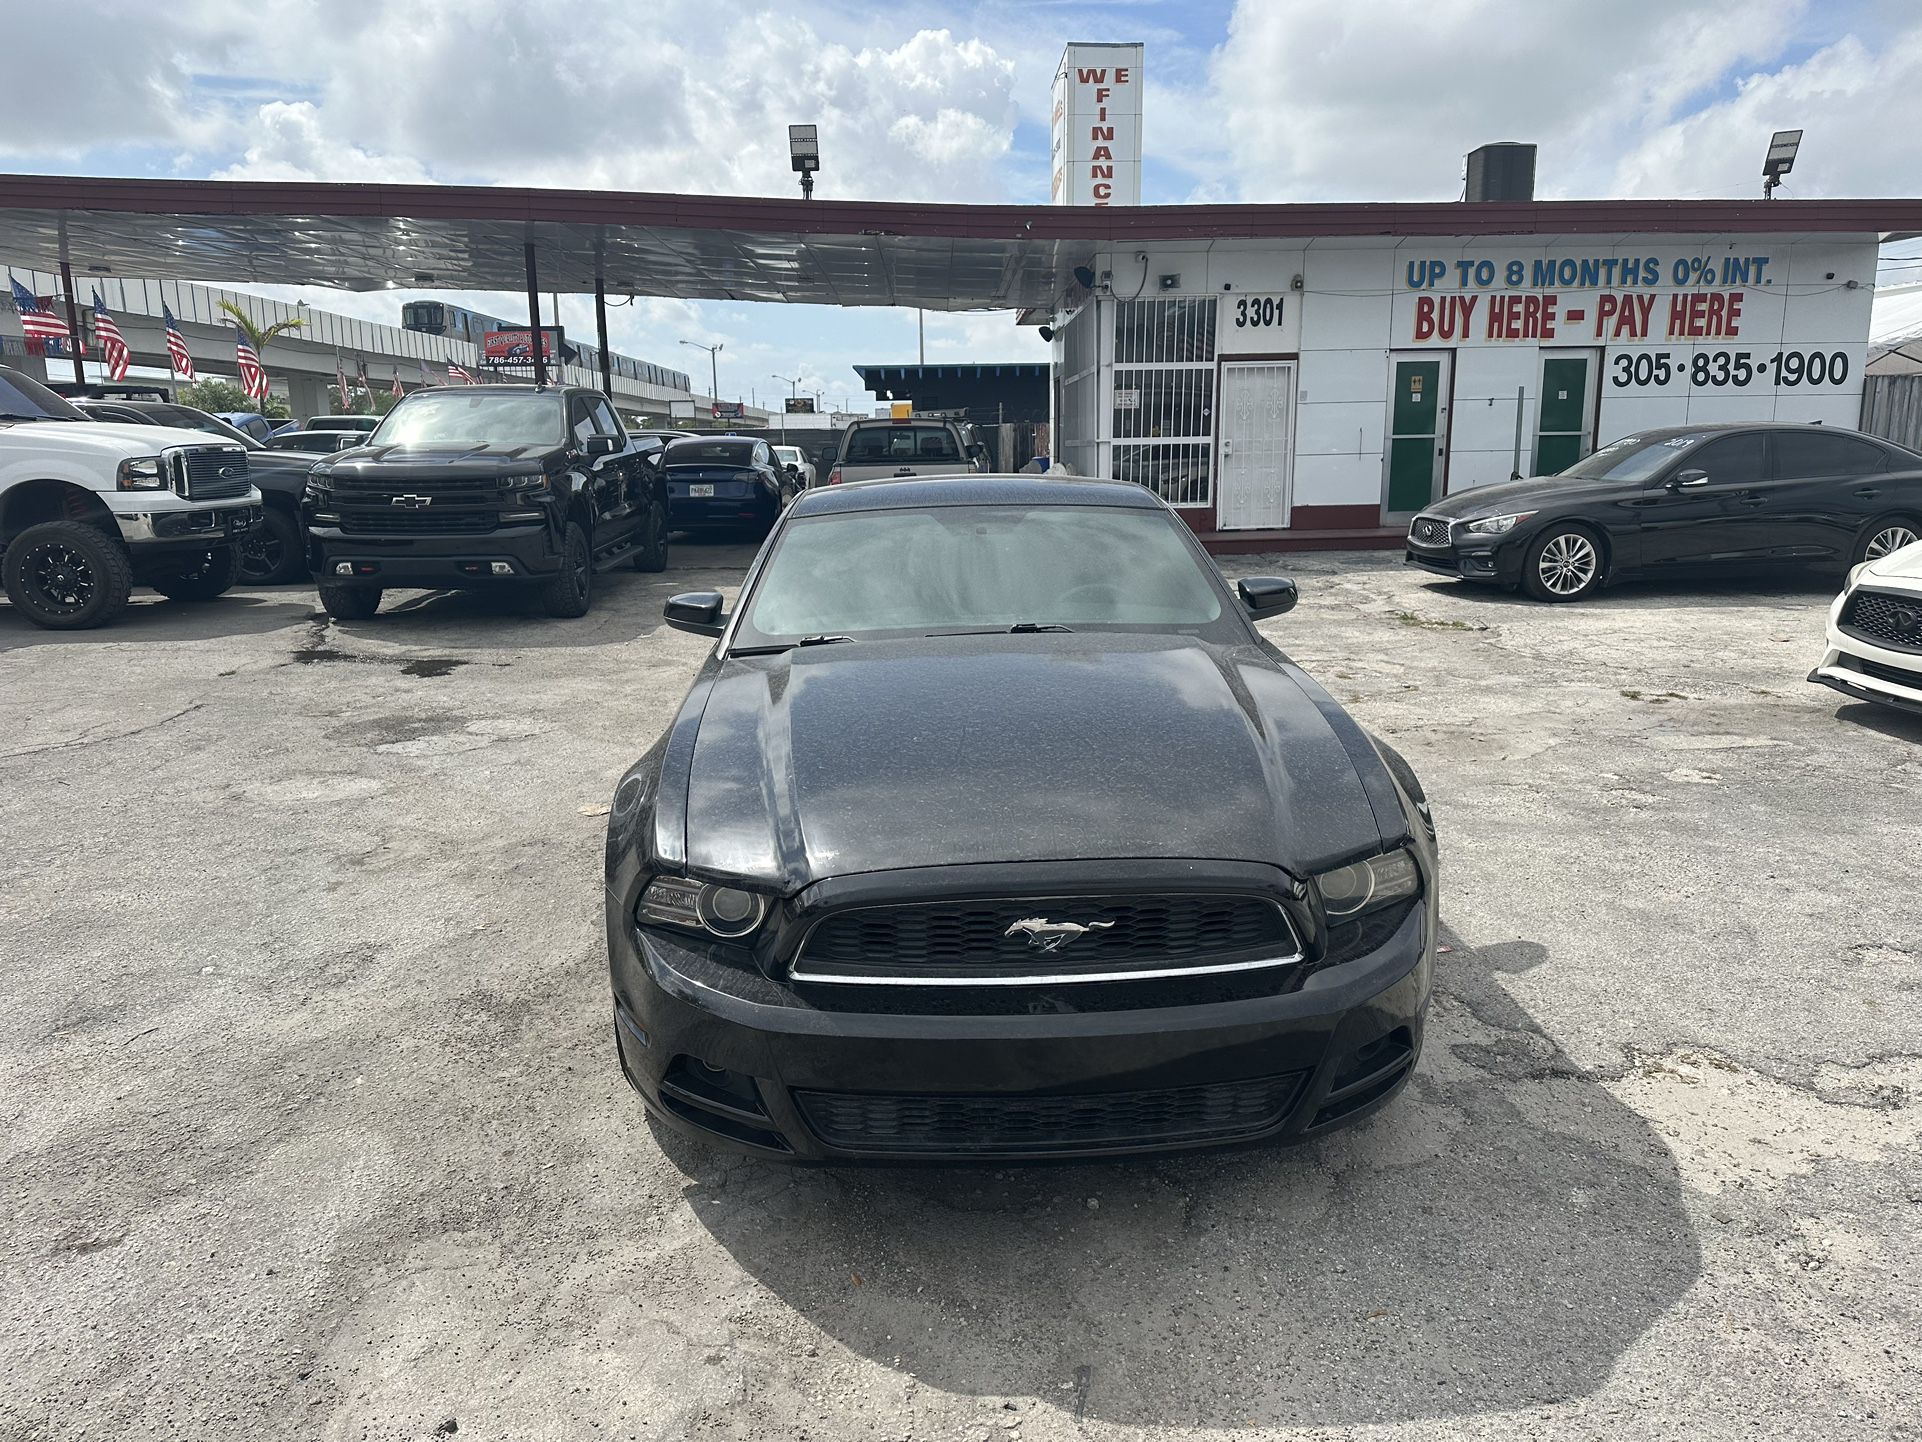 used 2014 ford mustang - front view 1